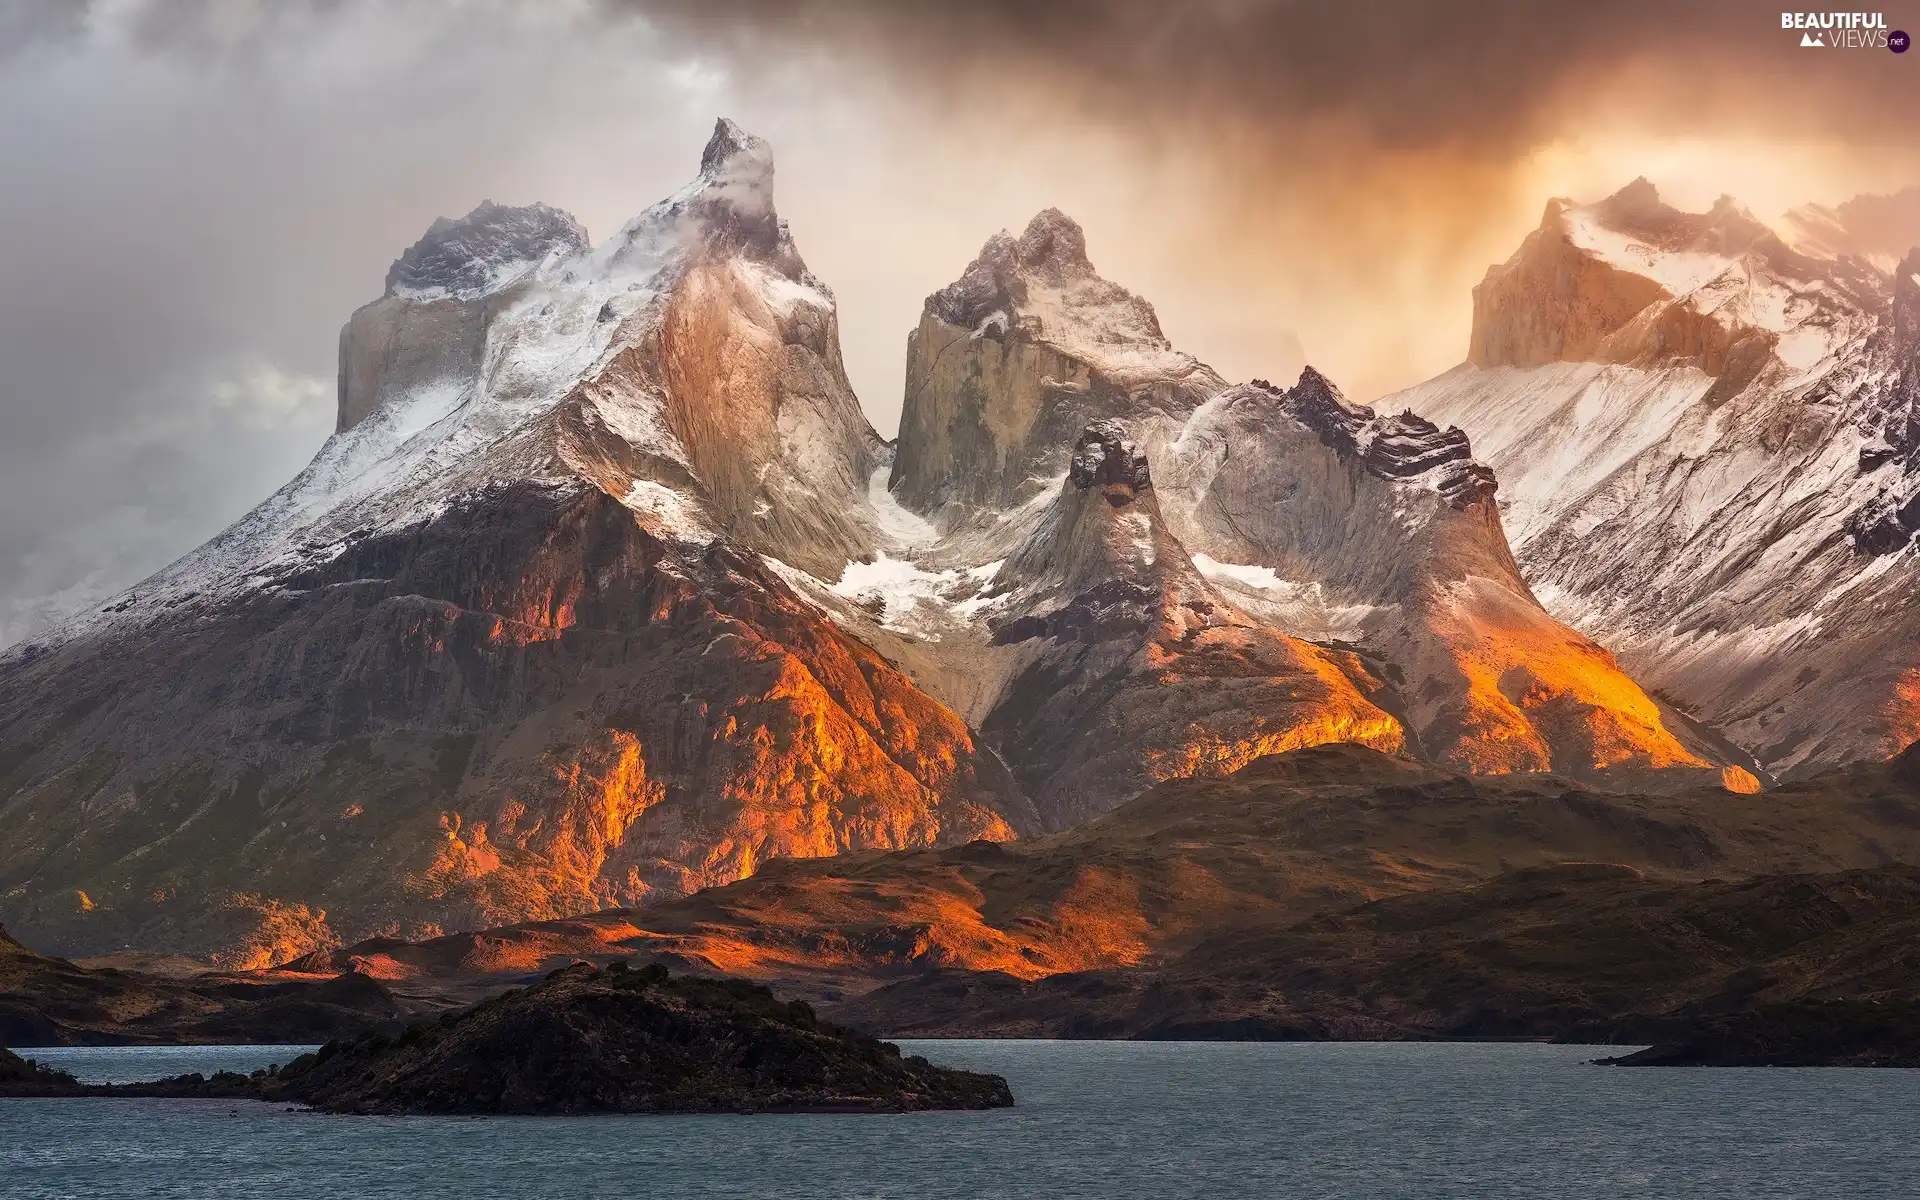 Torres del Paine, Chile, Lake Pehoé, Torres del Paine National Park, Mountains, Patagonia